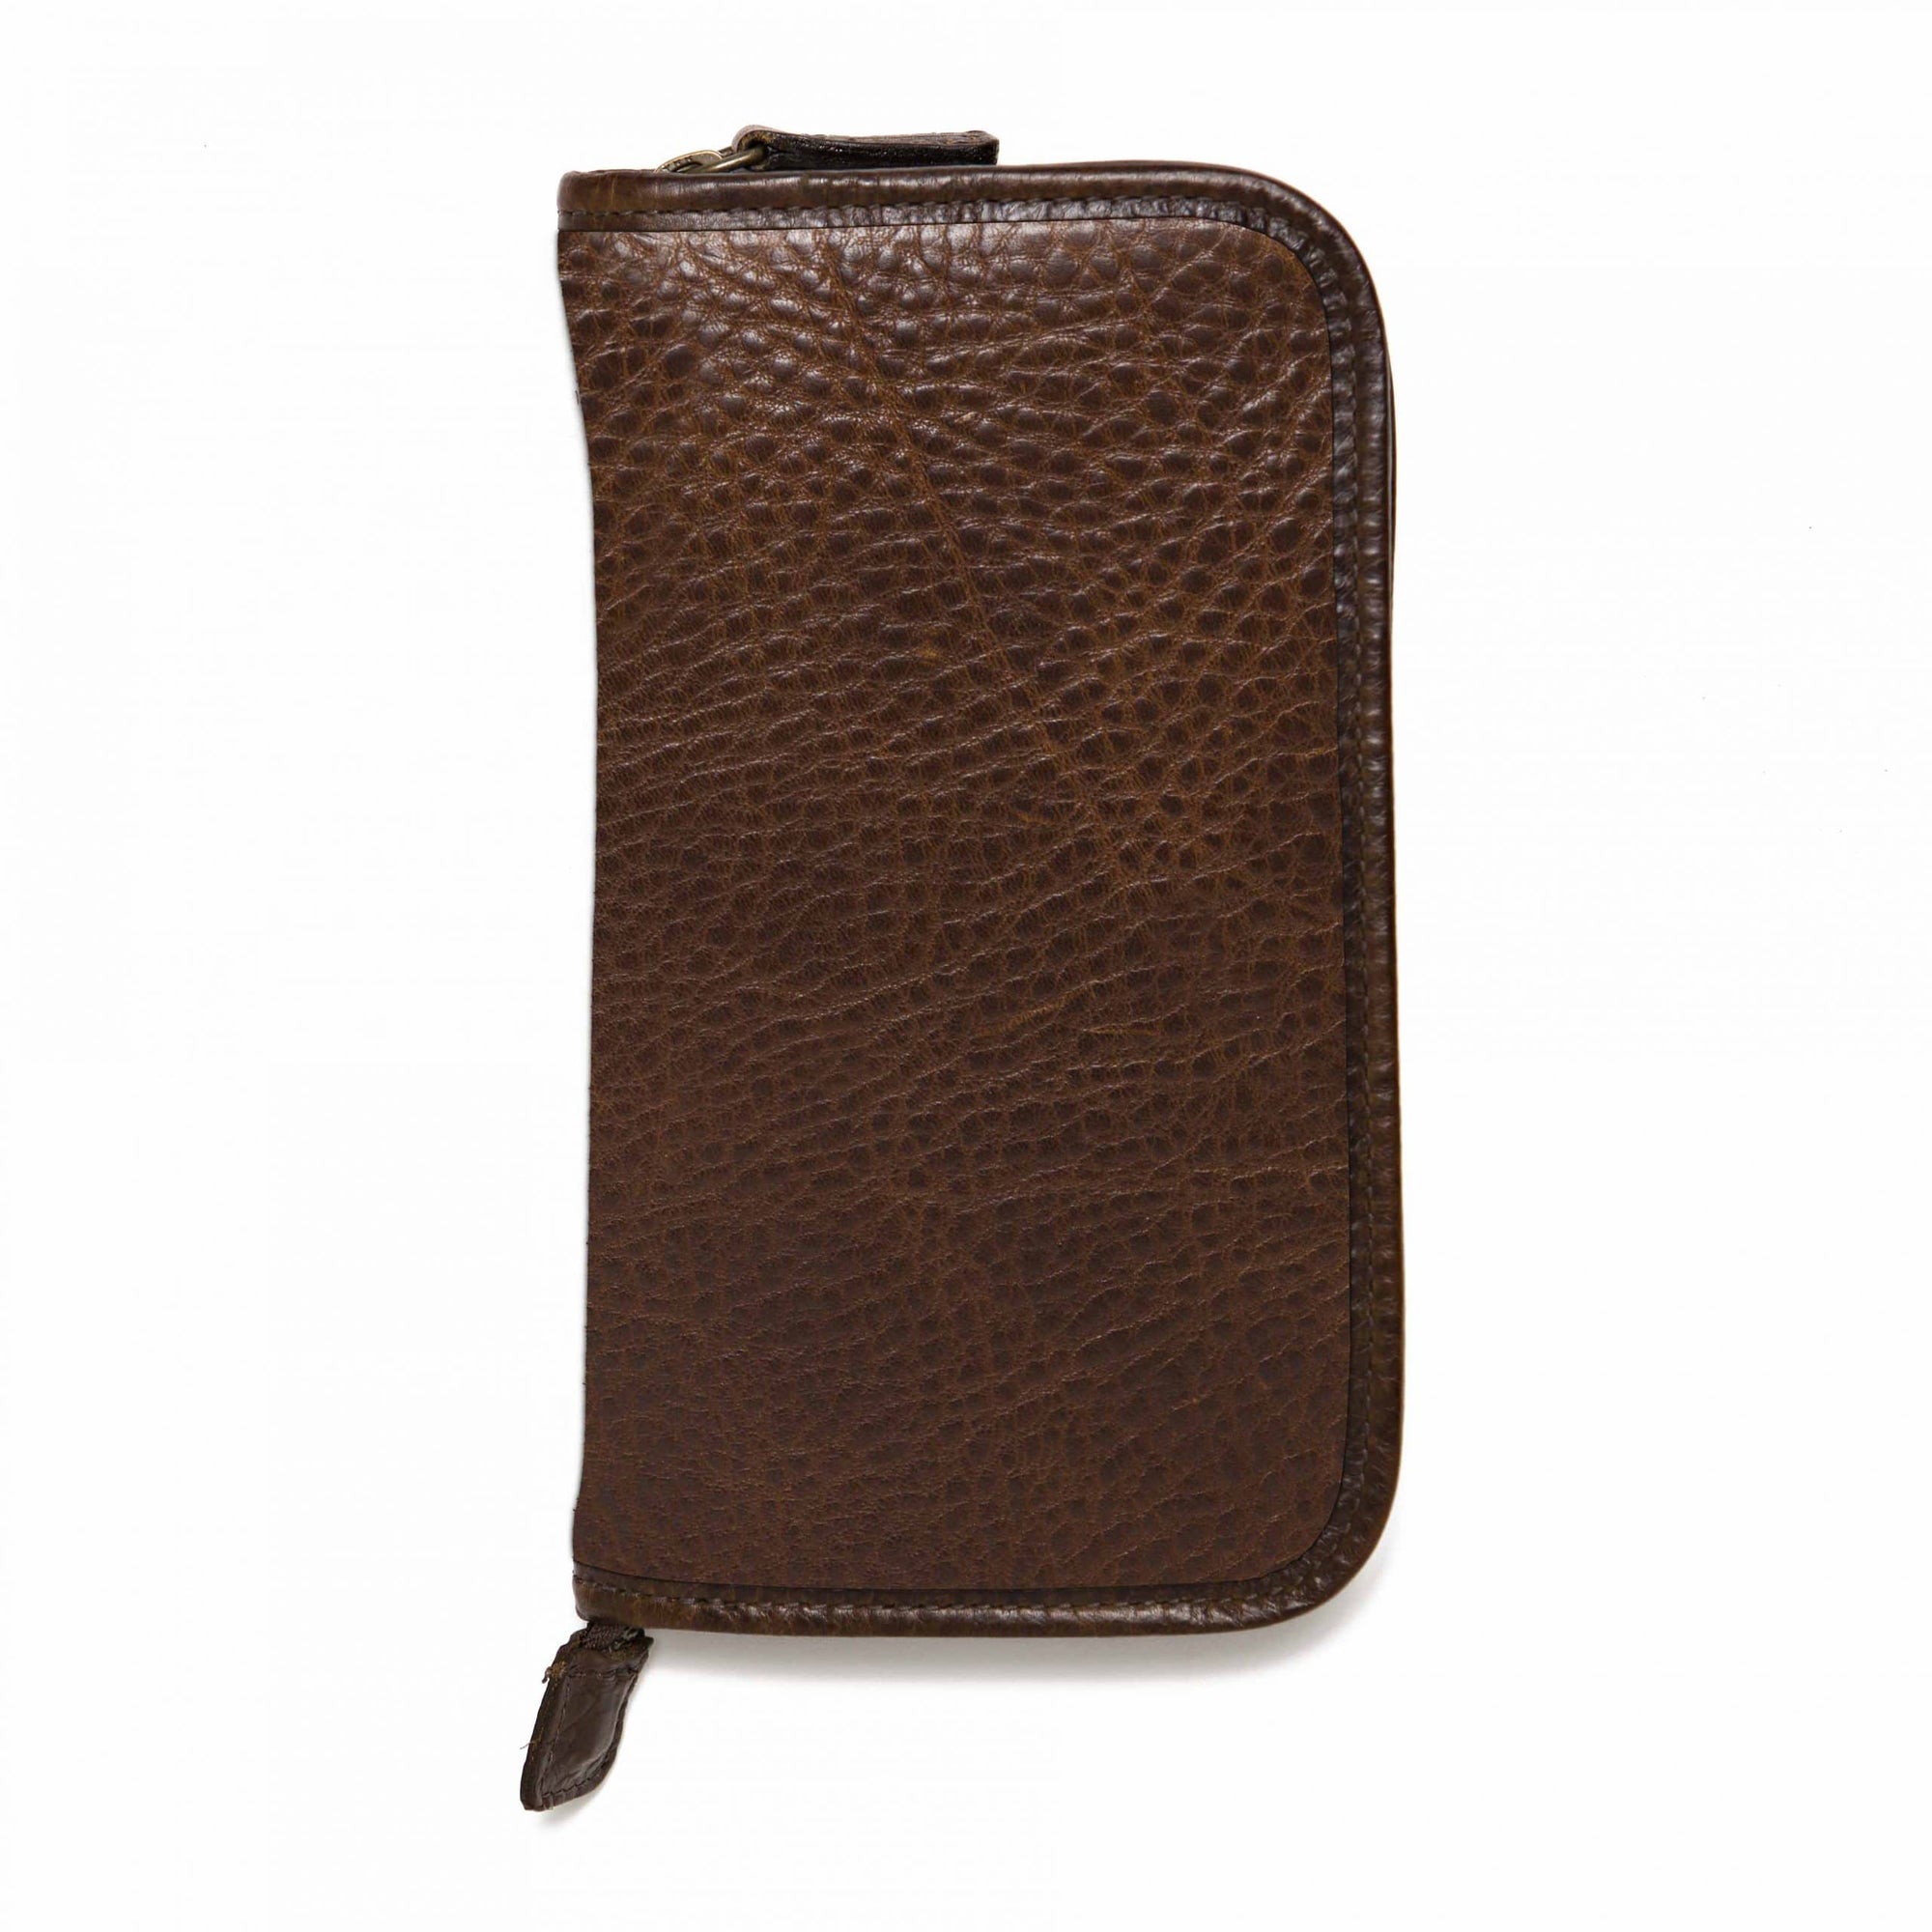 Shearling Lined Accessories Case in Titan Milled Brown by Moore & Giles